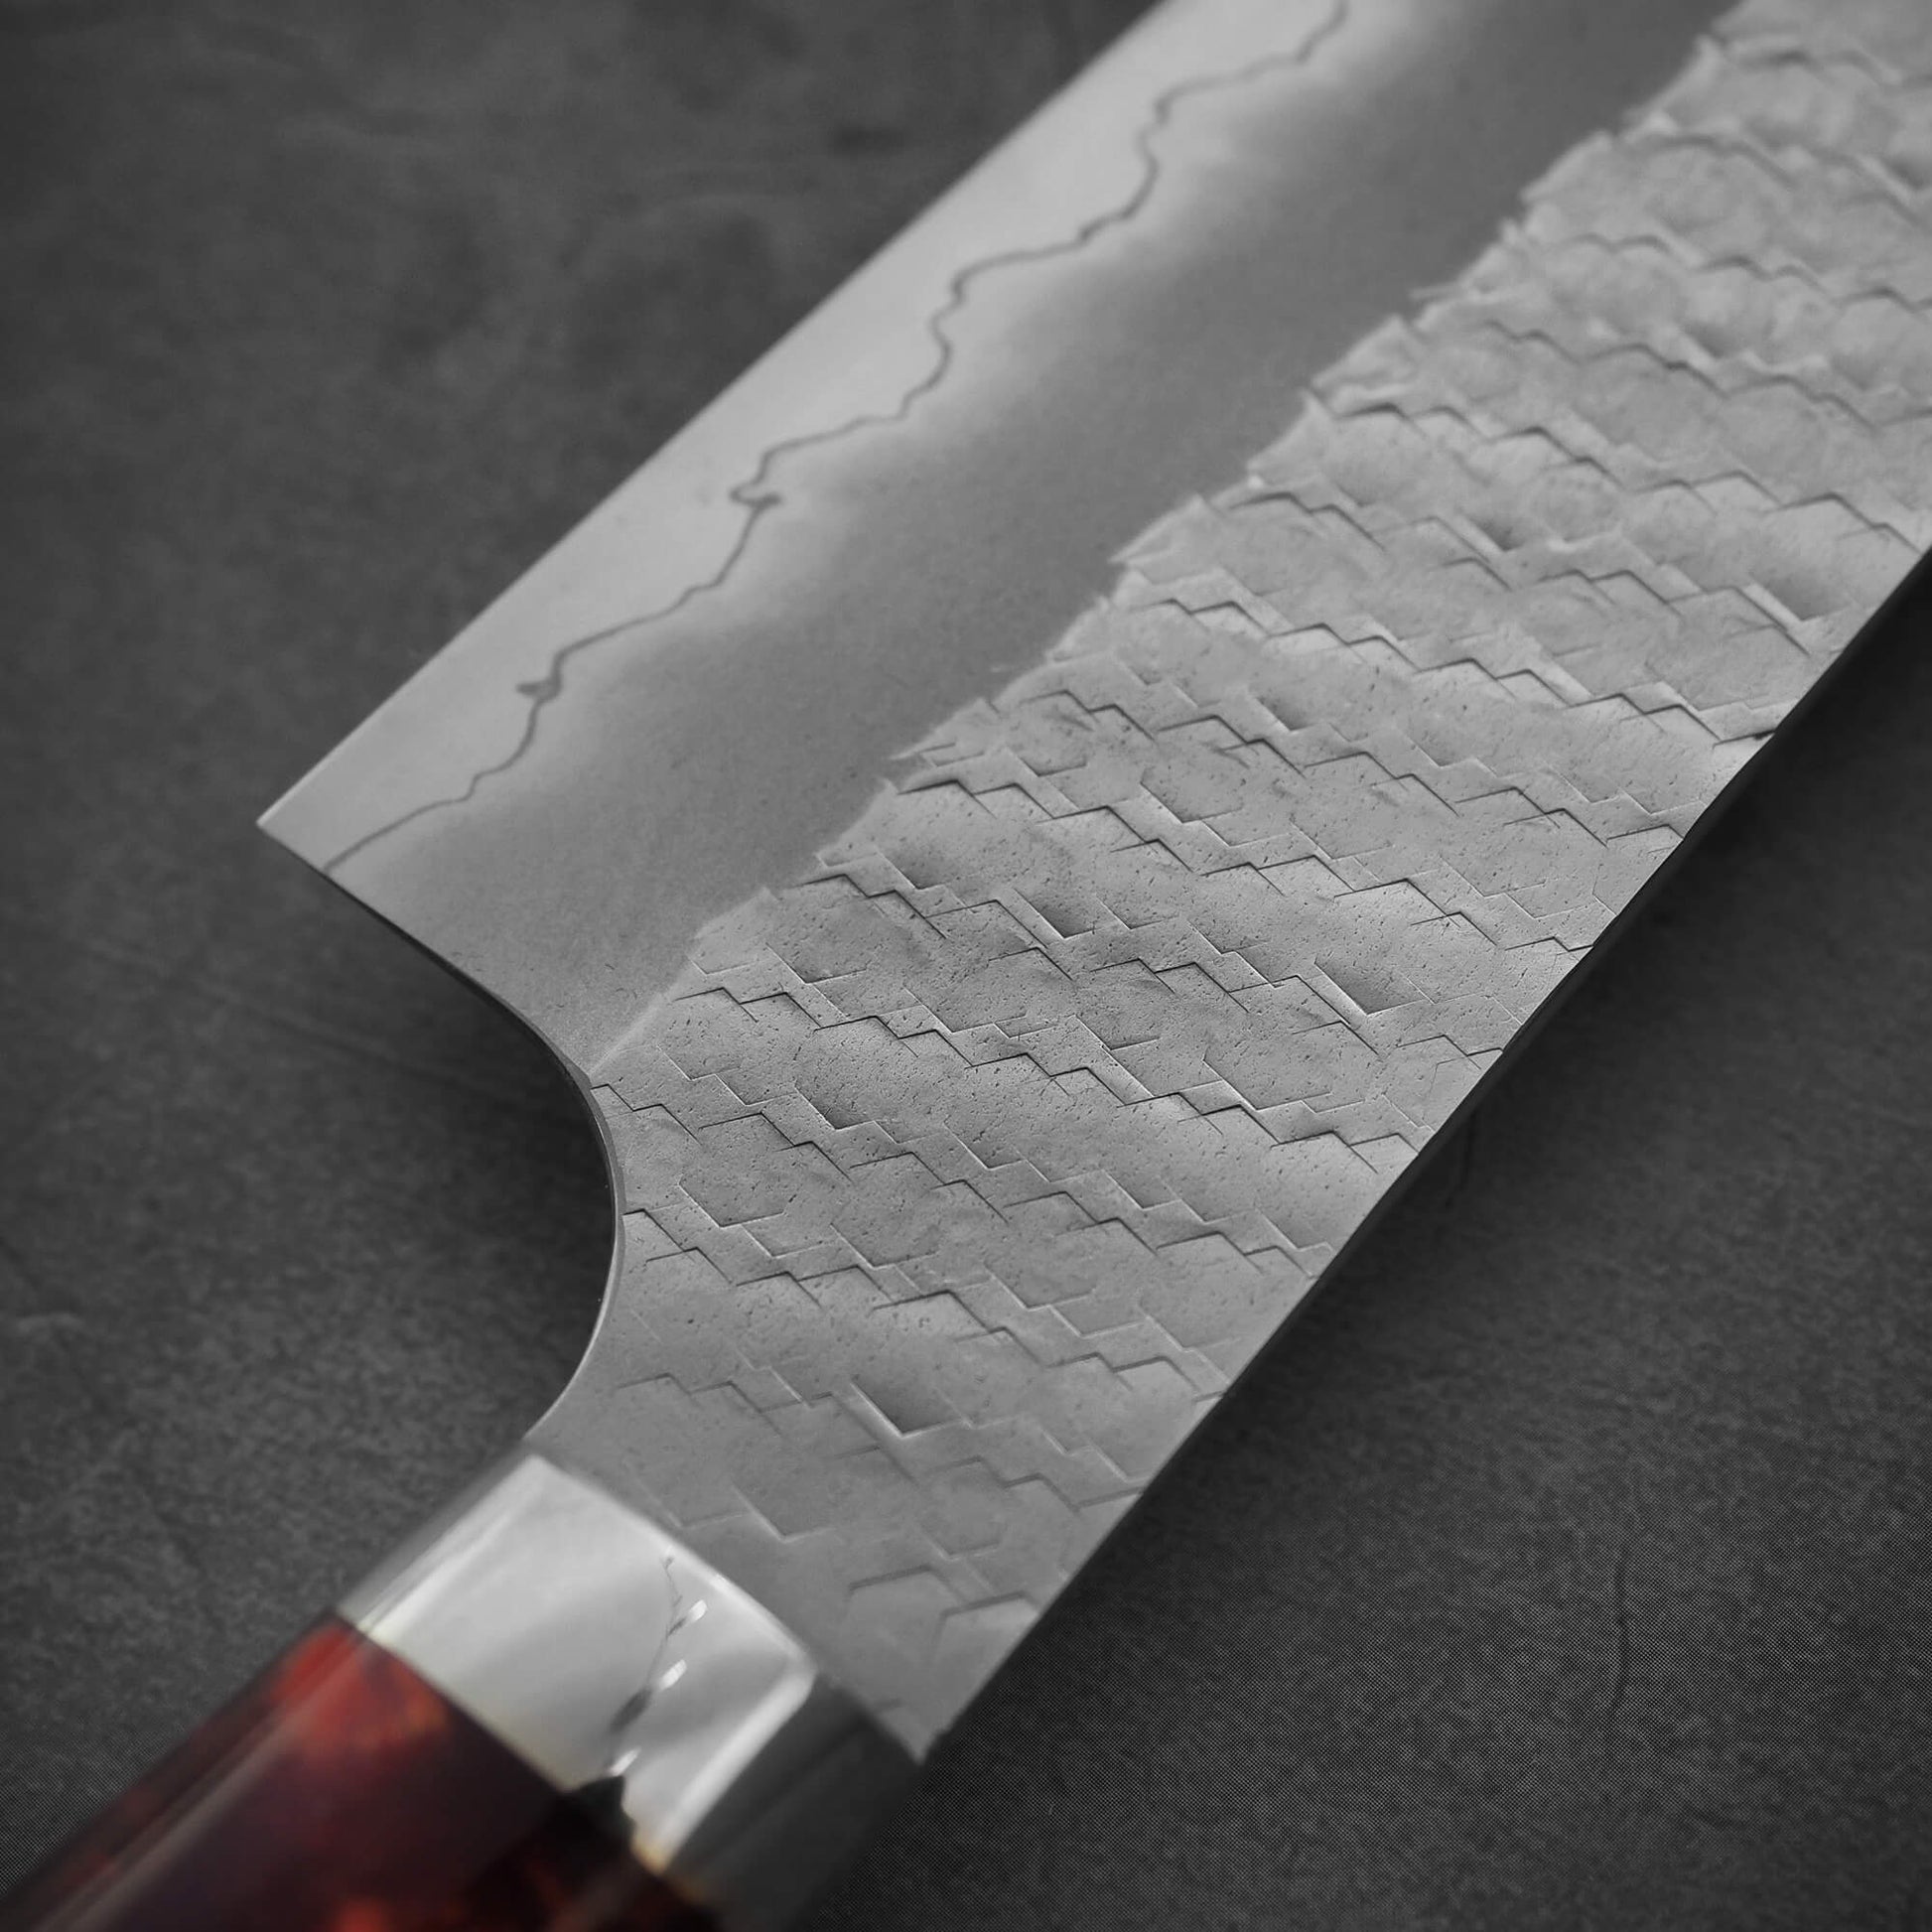 Close up view on the back side of the blade of 210mm Nigara tsuchime SG2 gyuto knife with red handle